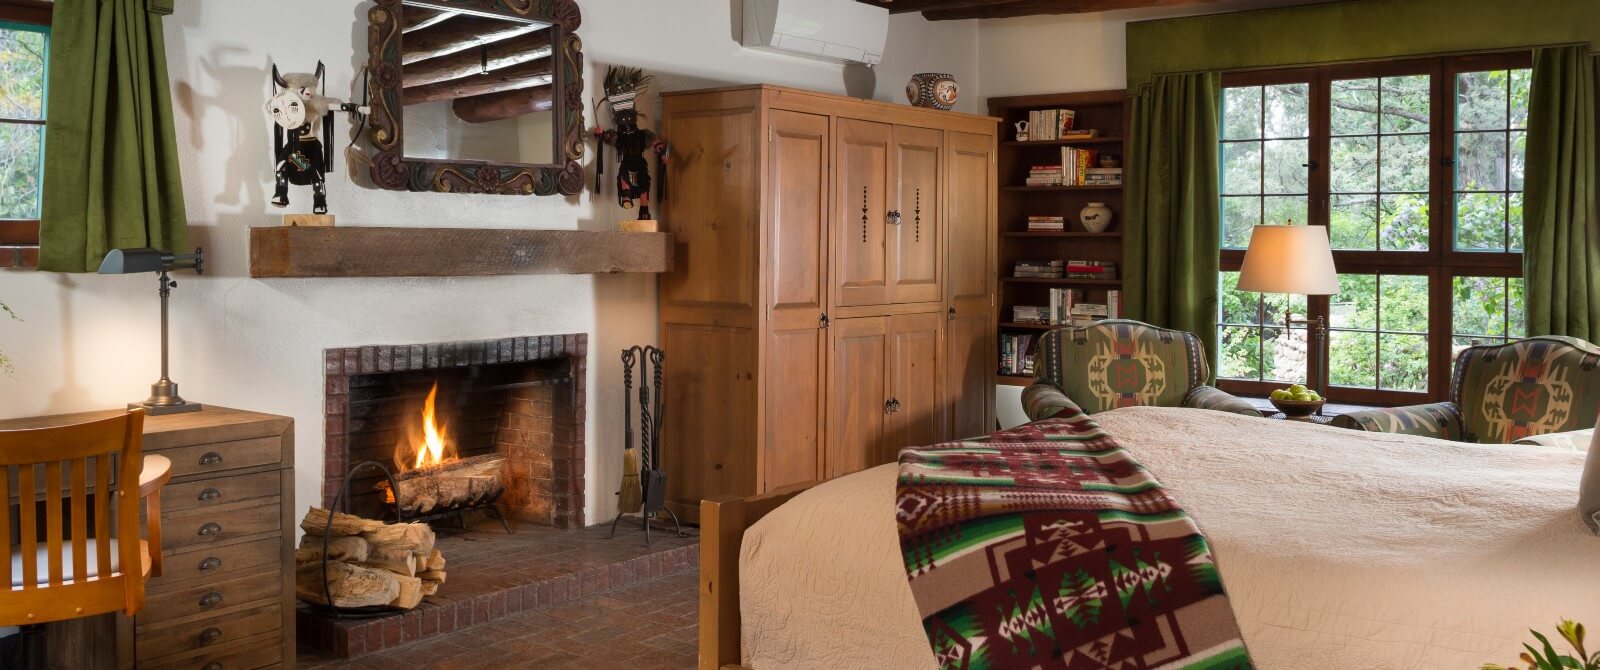 King sized bed, desk, two reading chairs, large wardrobe, fire burning in wood burning fireplace and windows with garden views